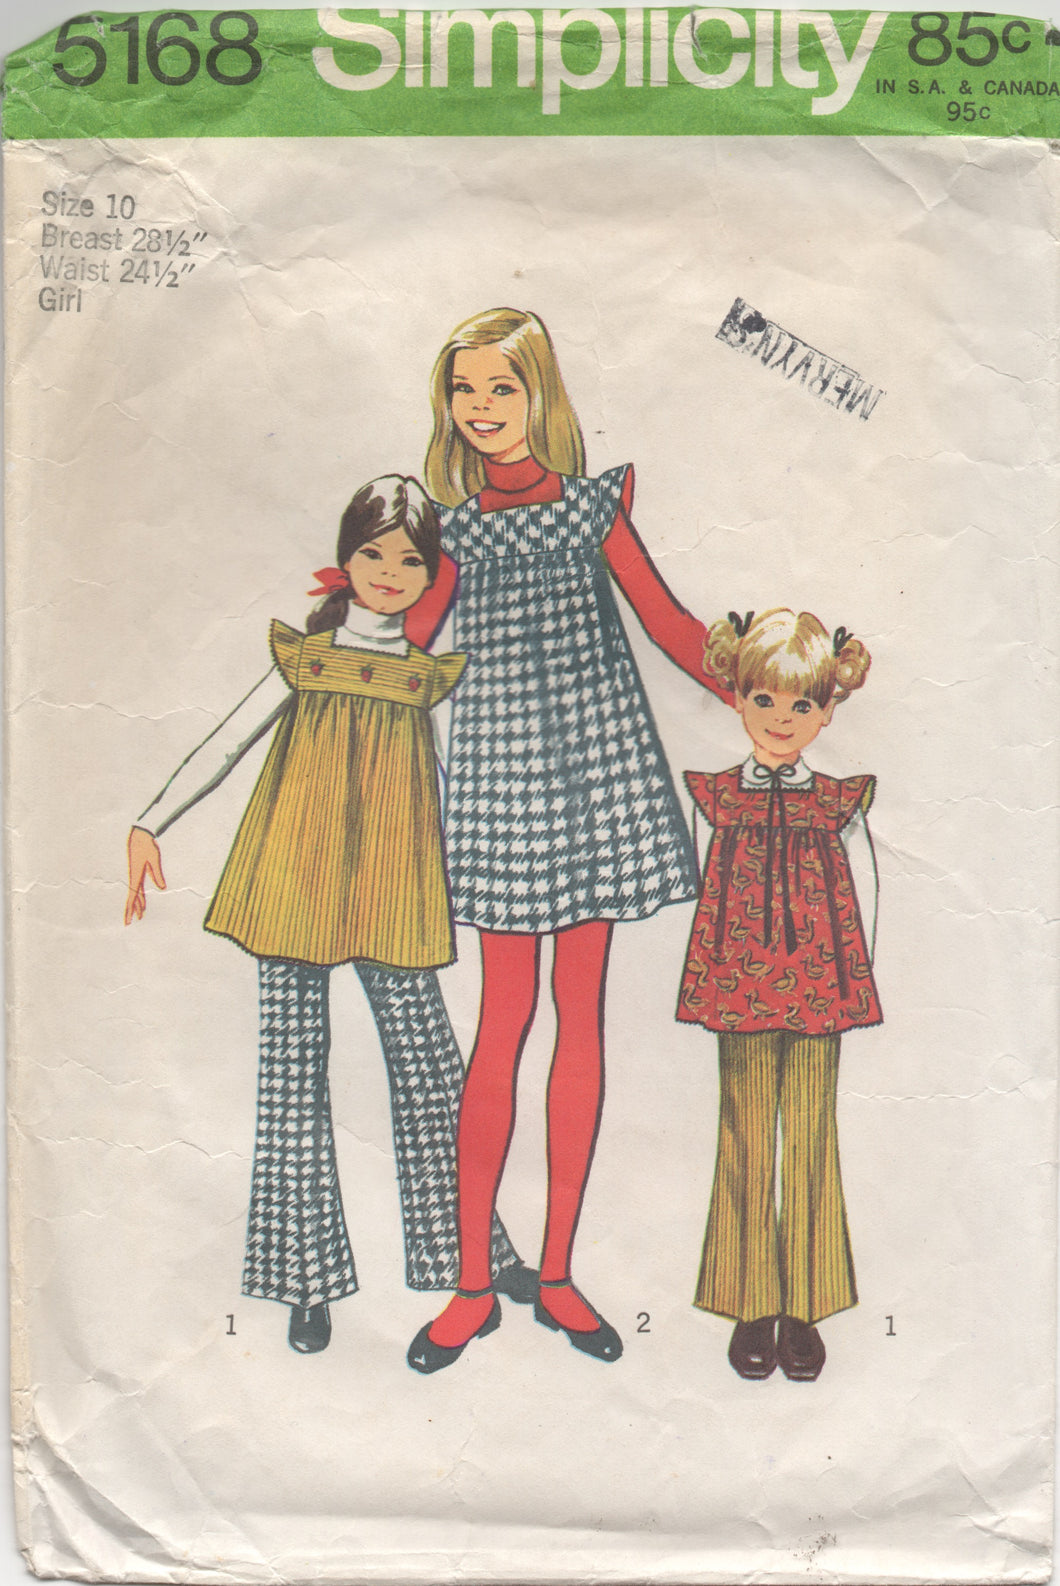 1970's Simplicity Child's One Piece Dress or Tunic with Ruffle Sleeves and Bell Bottom pants - Size 10 - No. 5168